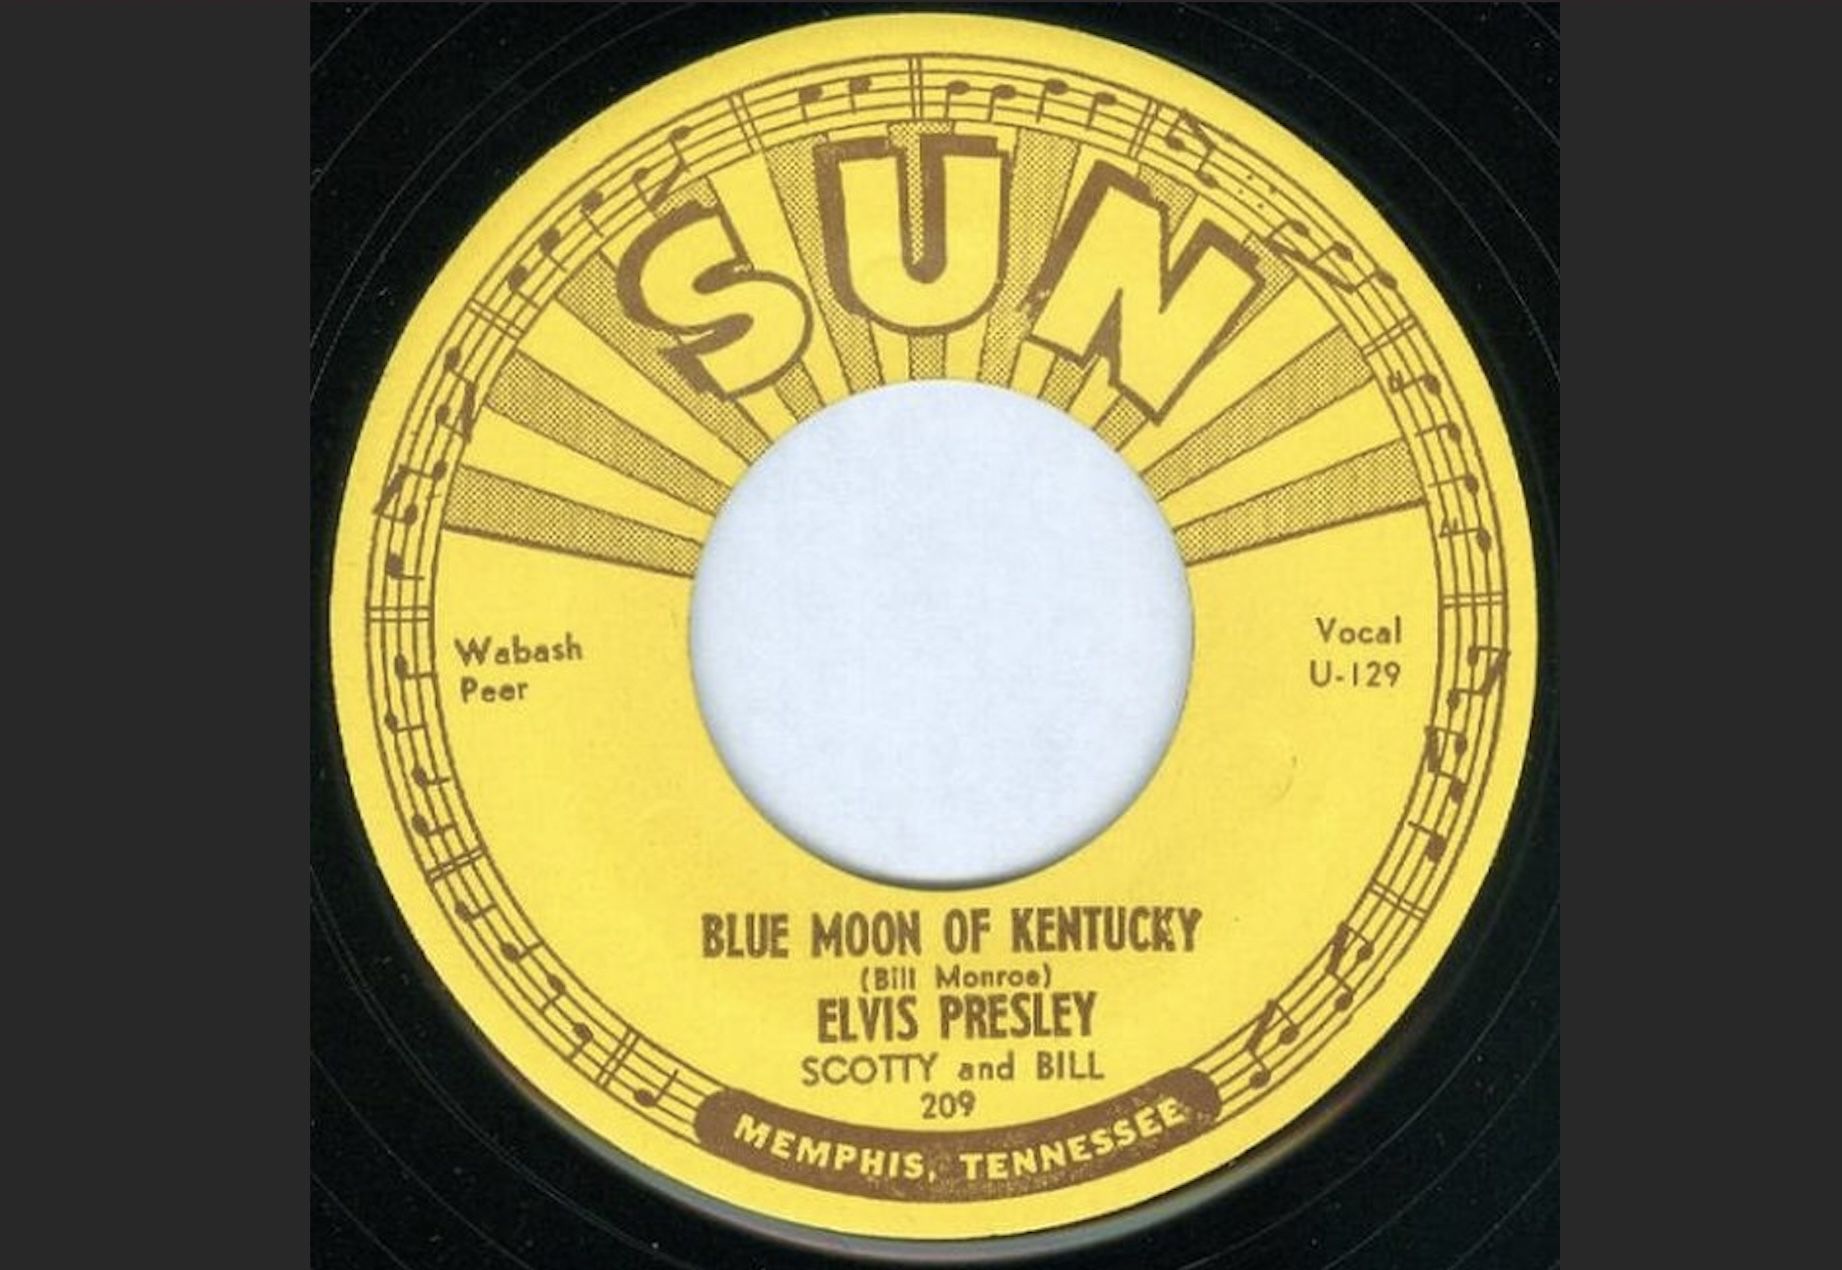 <p>Elvis recorded over 600 songs in his career, and <a href="https://www.ripleys.com/weird-news/bizarre-elvis-facts/">15 of those songs</a> have the same word in the title – blue. They include “Blue Suede Shoes,” “Blue Moon of Kentucky,” and “Blue Eyes Crying in the Rain.”</p>